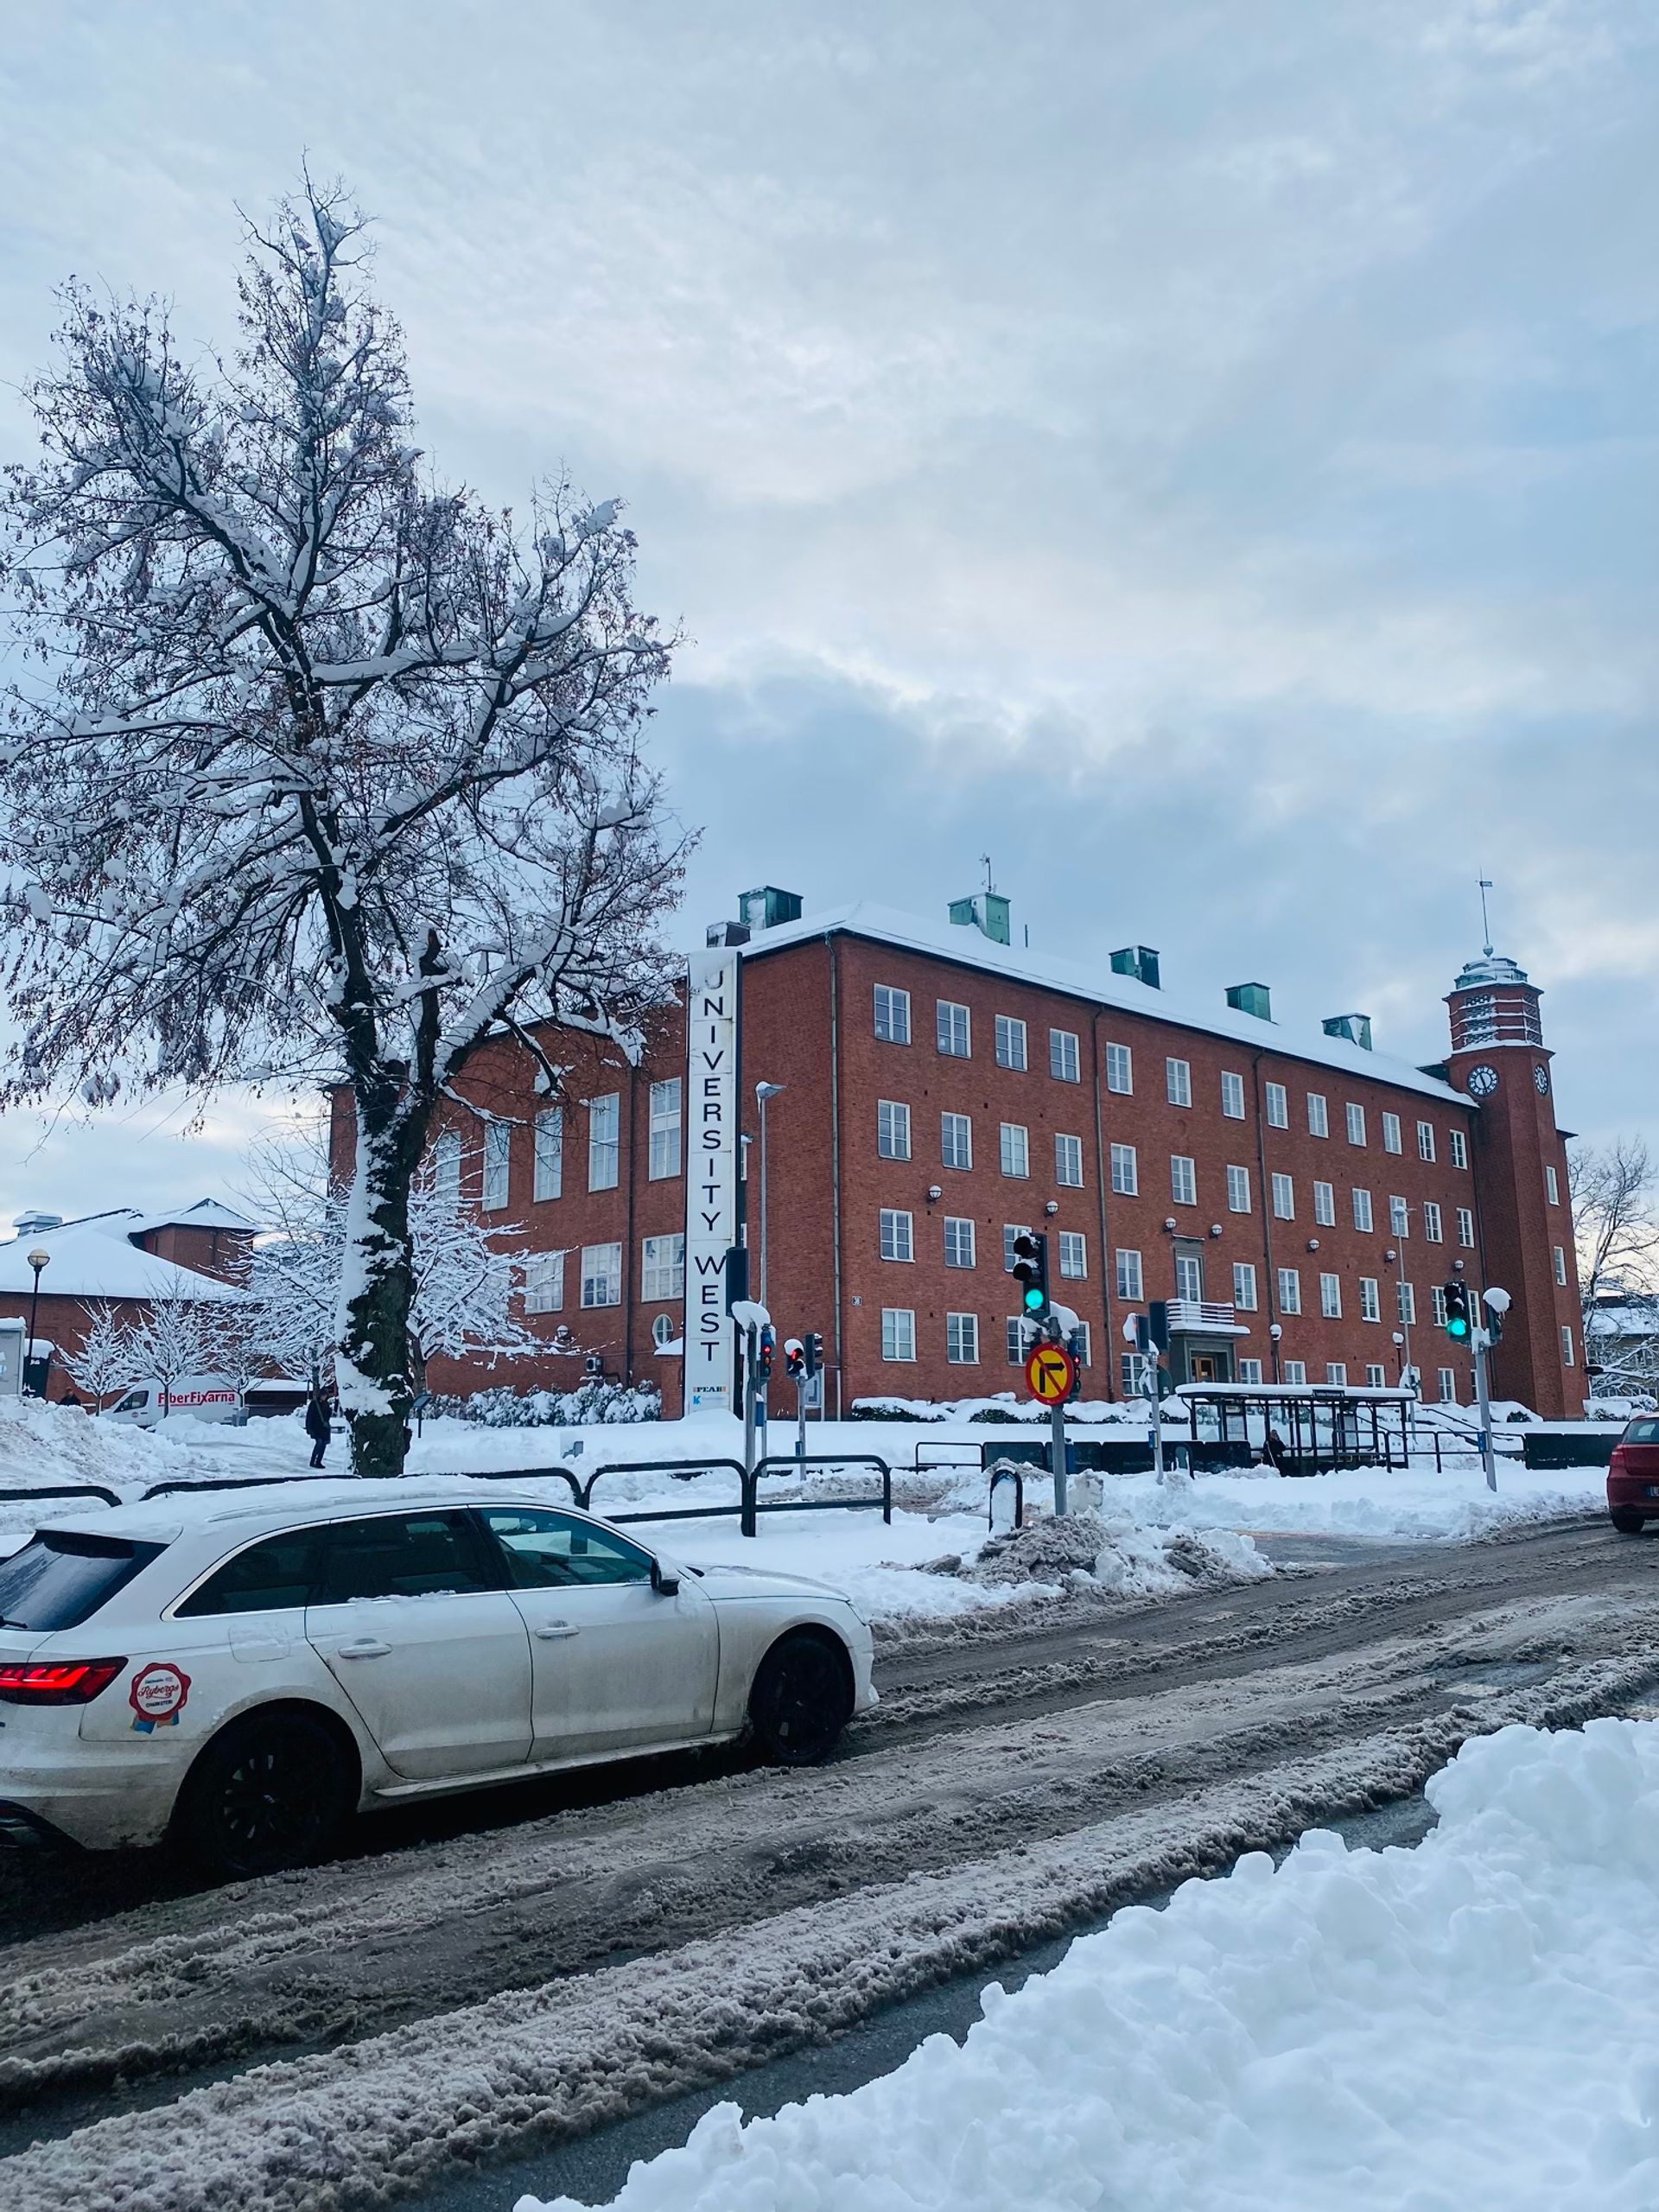 A view of University West during winter